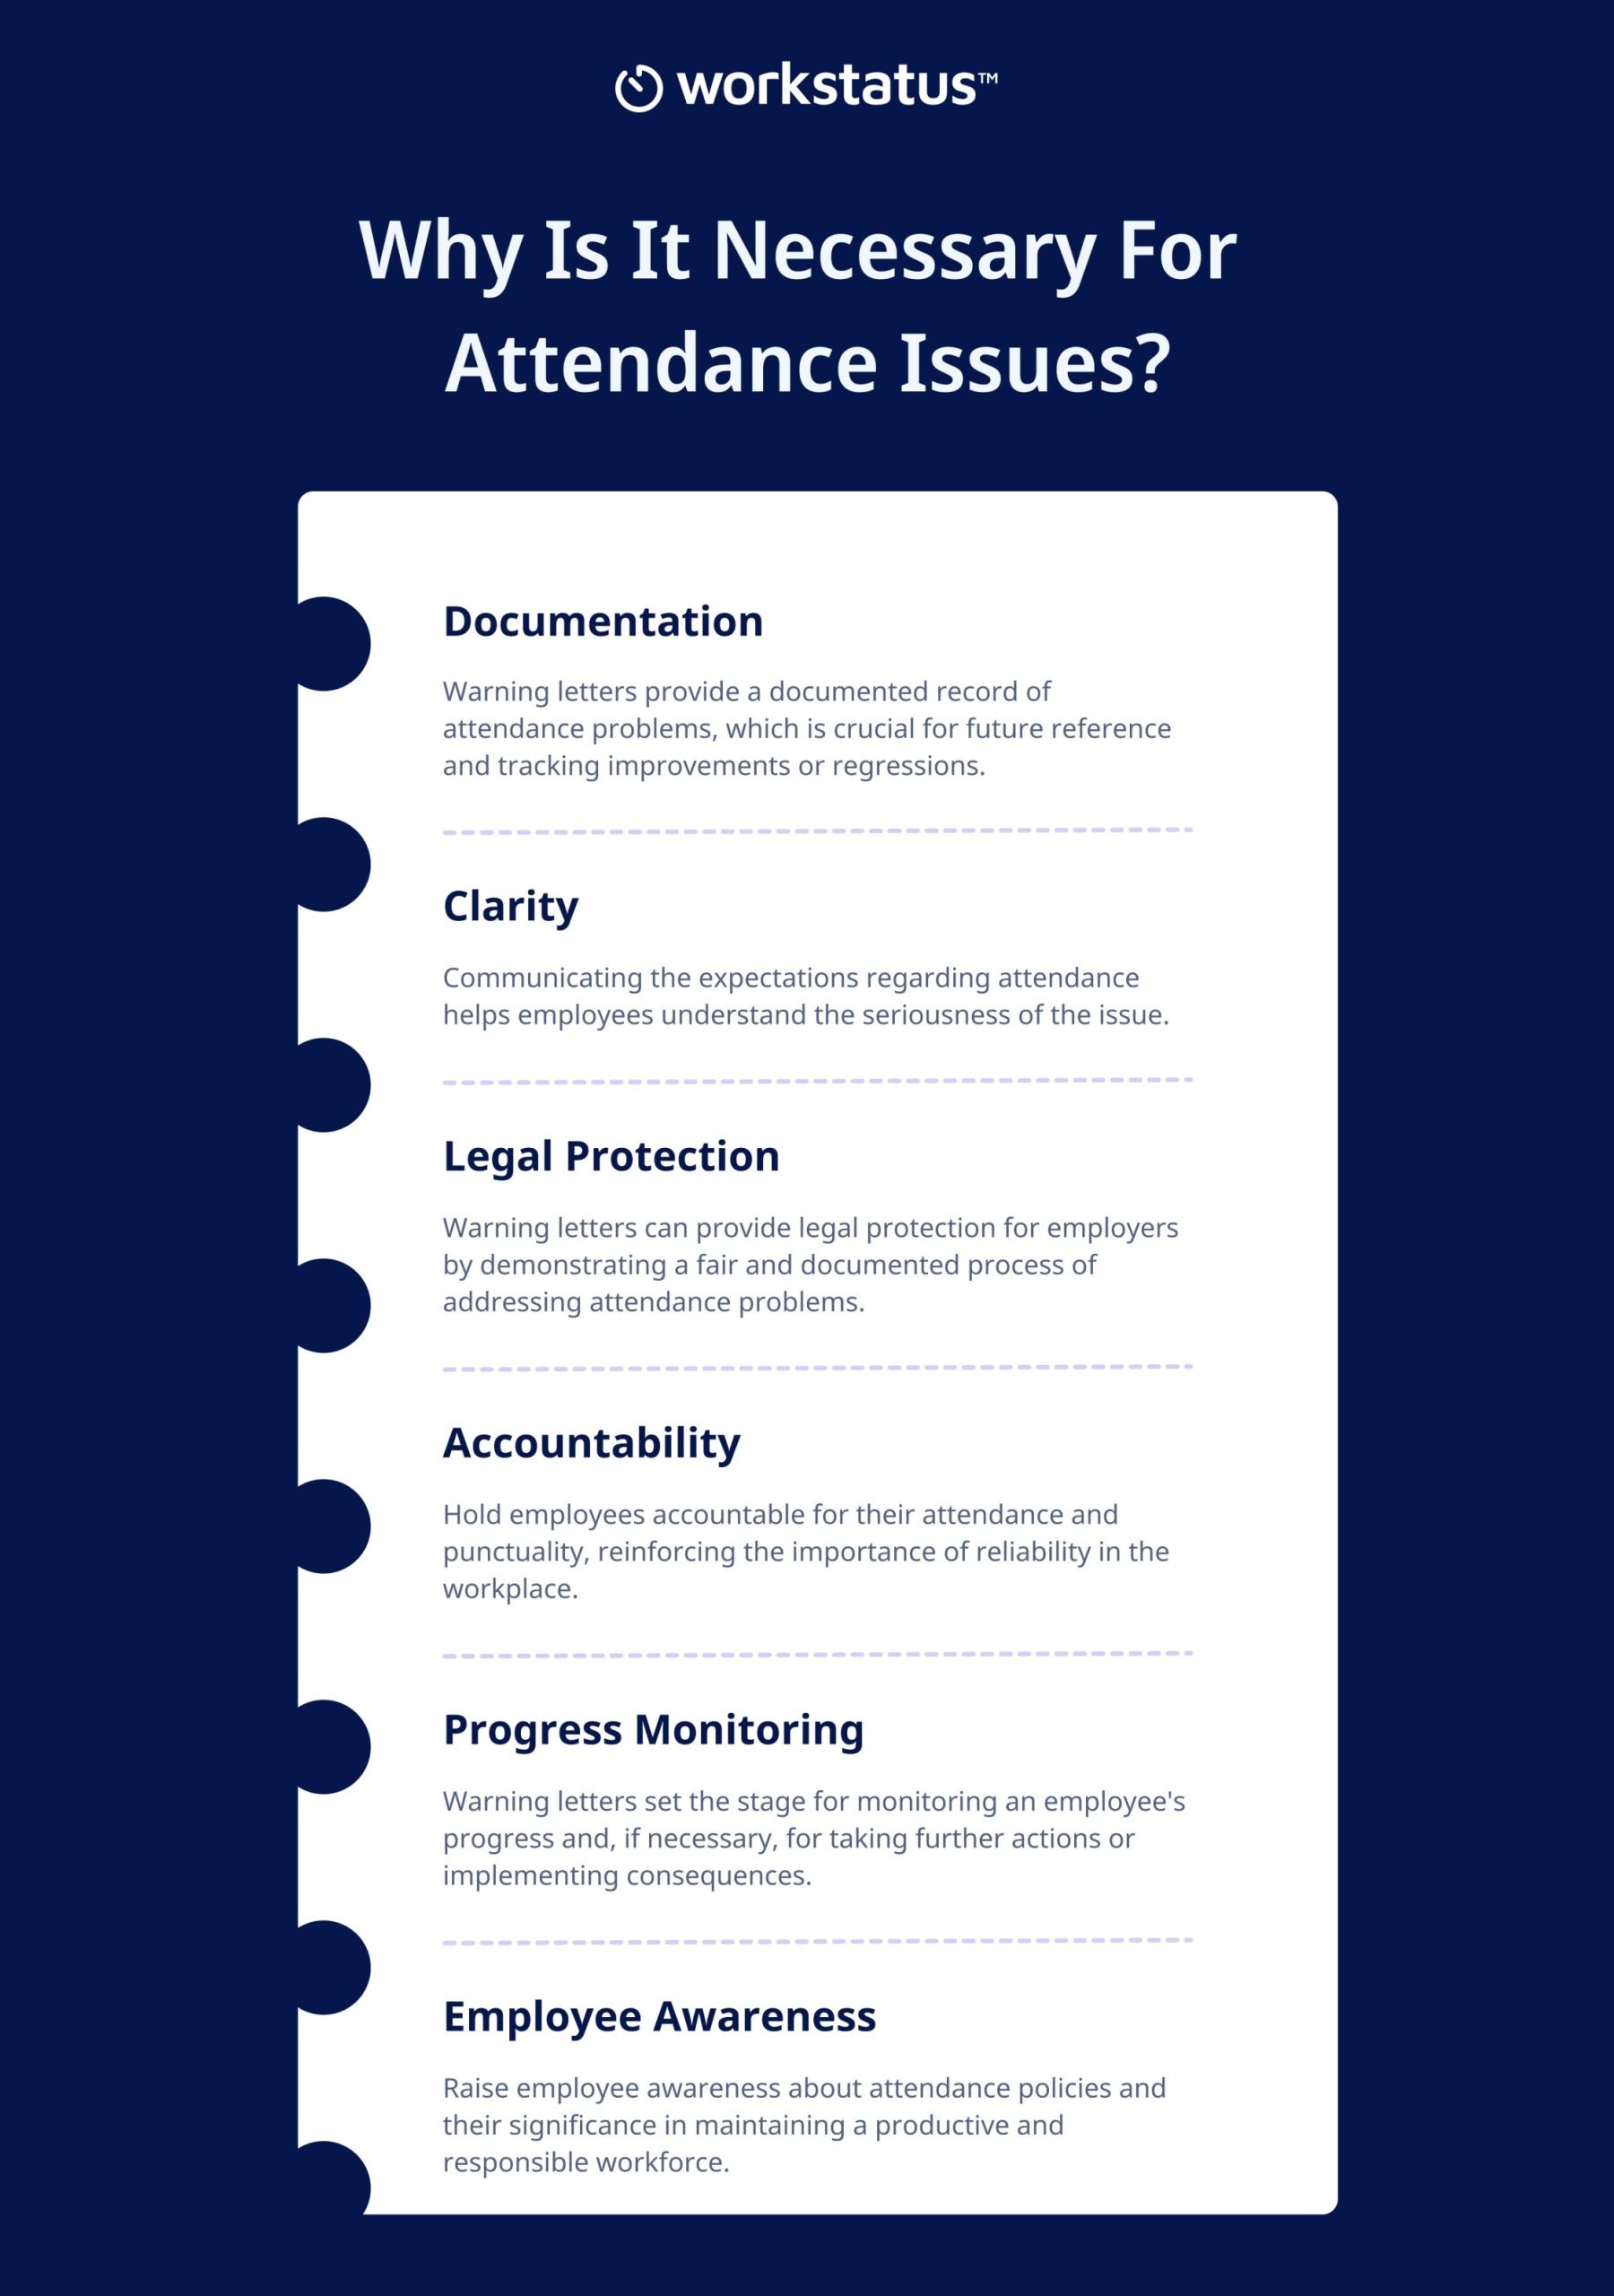 Why Is It Necessary For Attendance Issues?